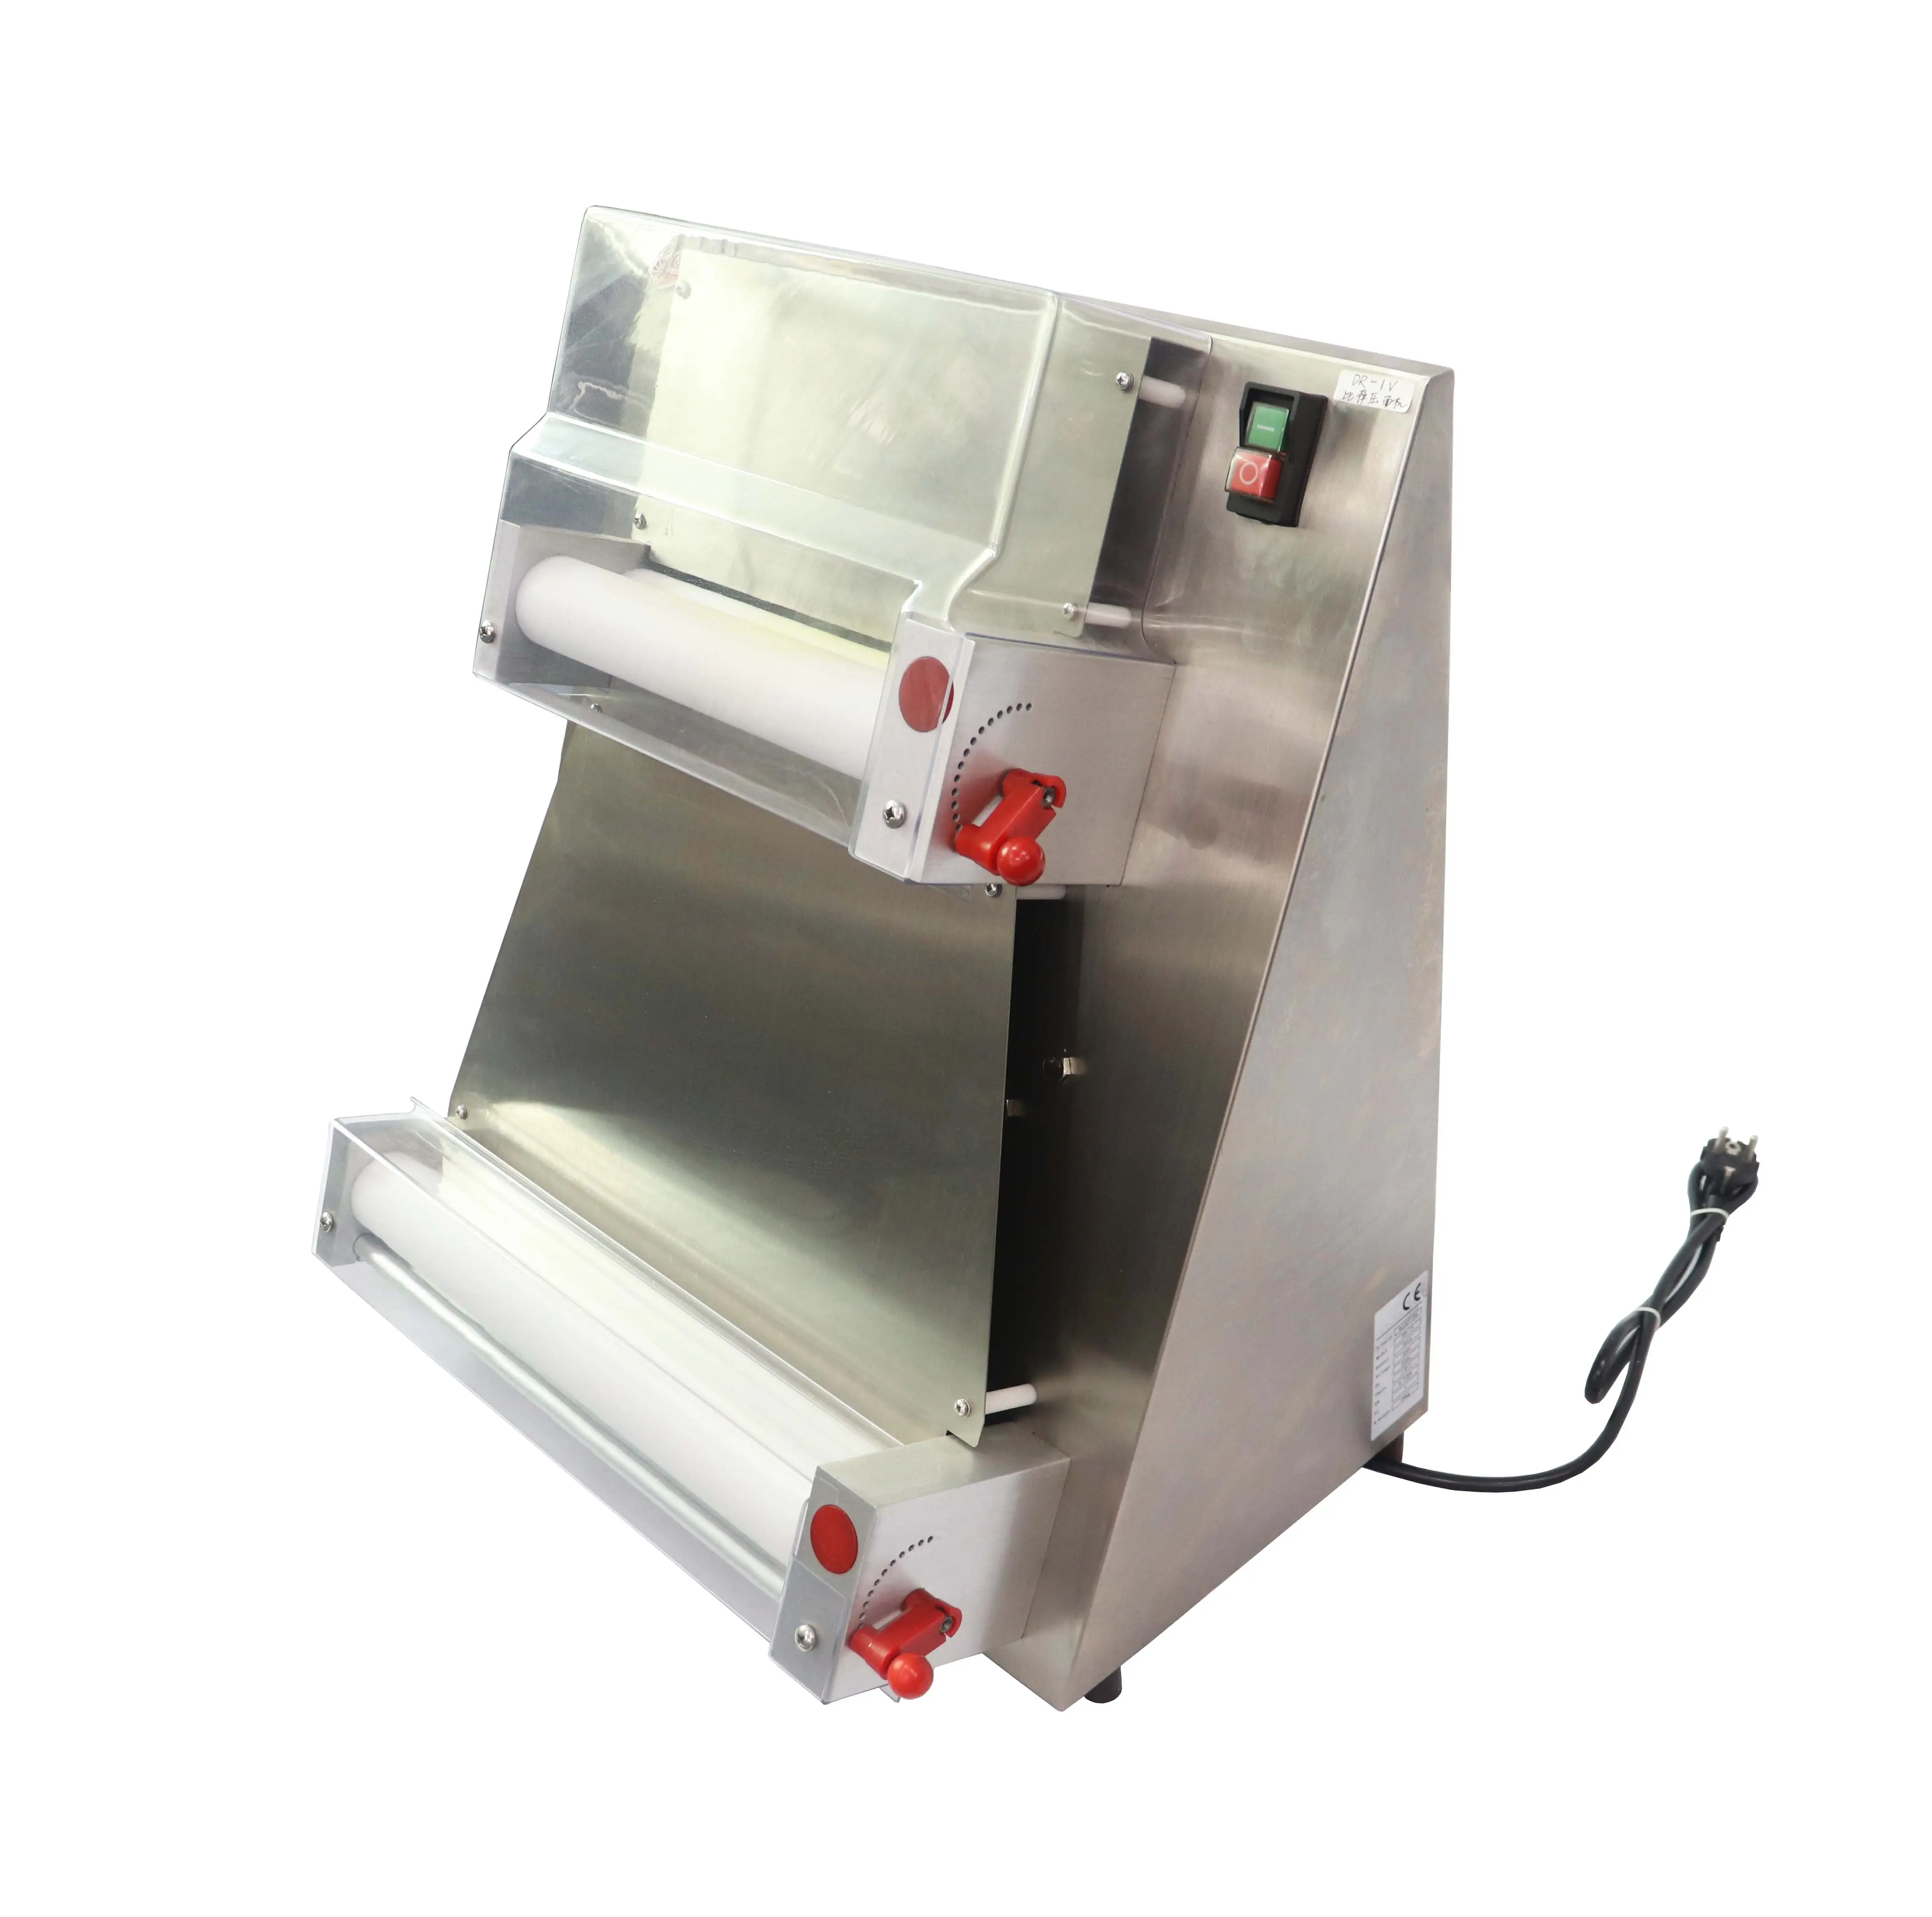 Hot sale stainless steel pizza dough roller machine, pizza dough sheeter machine(ZQF-40S)